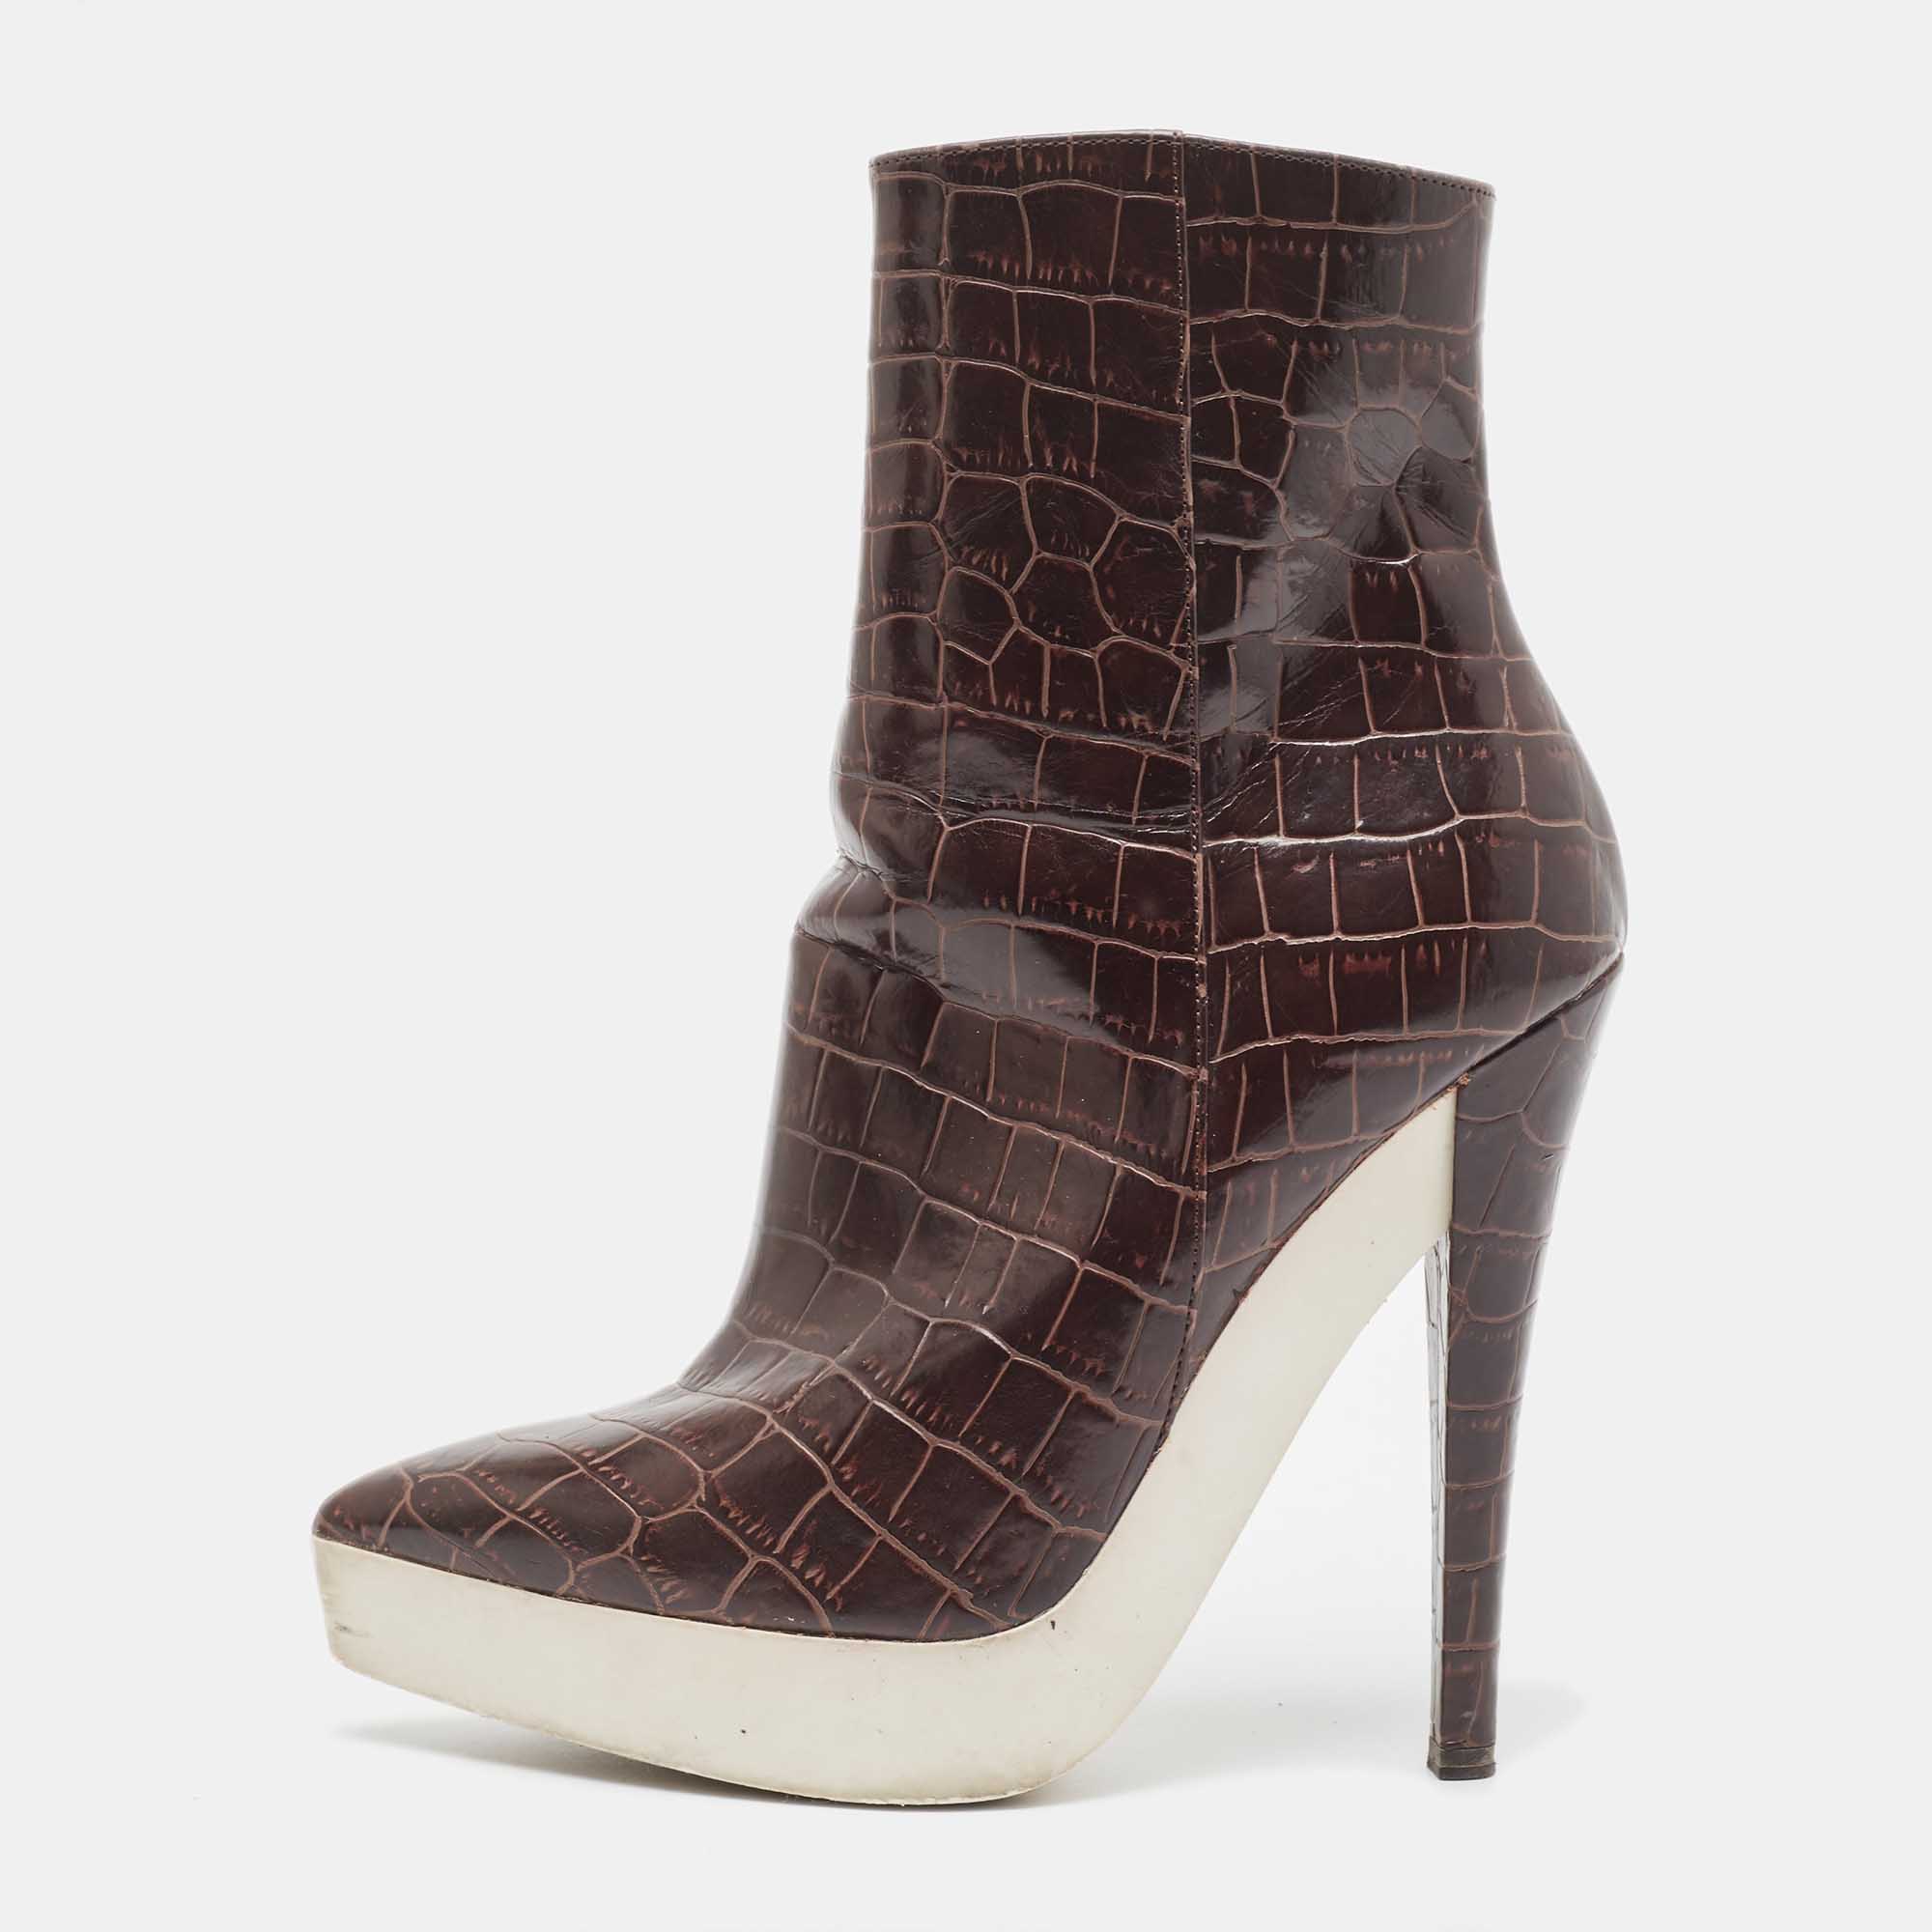 Stella McCartney Brown Croc Embossed Ankle Boots Size 37